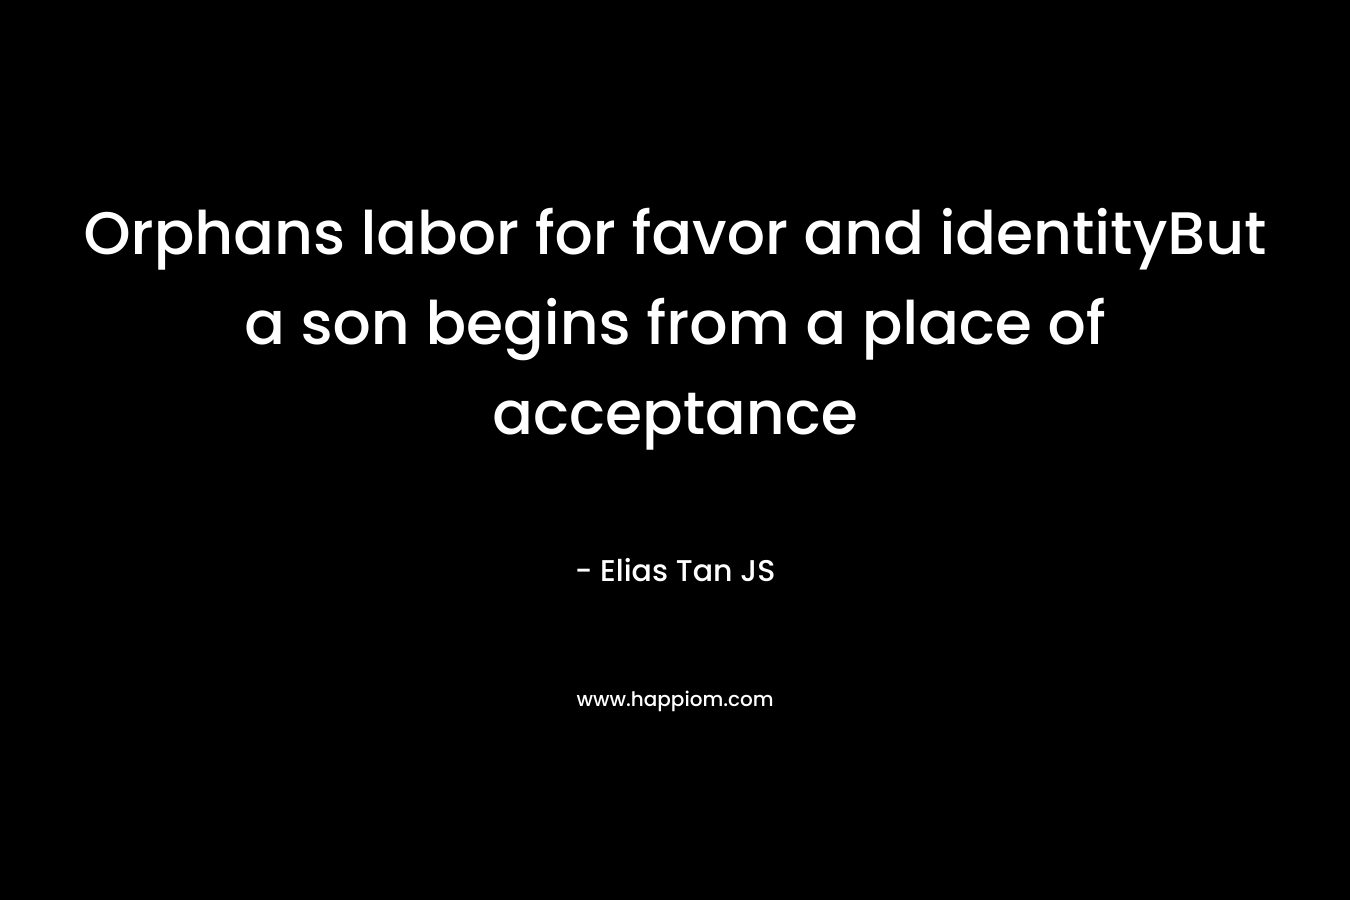 Orphans labor for favor and identityBut a son begins from a place of acceptance